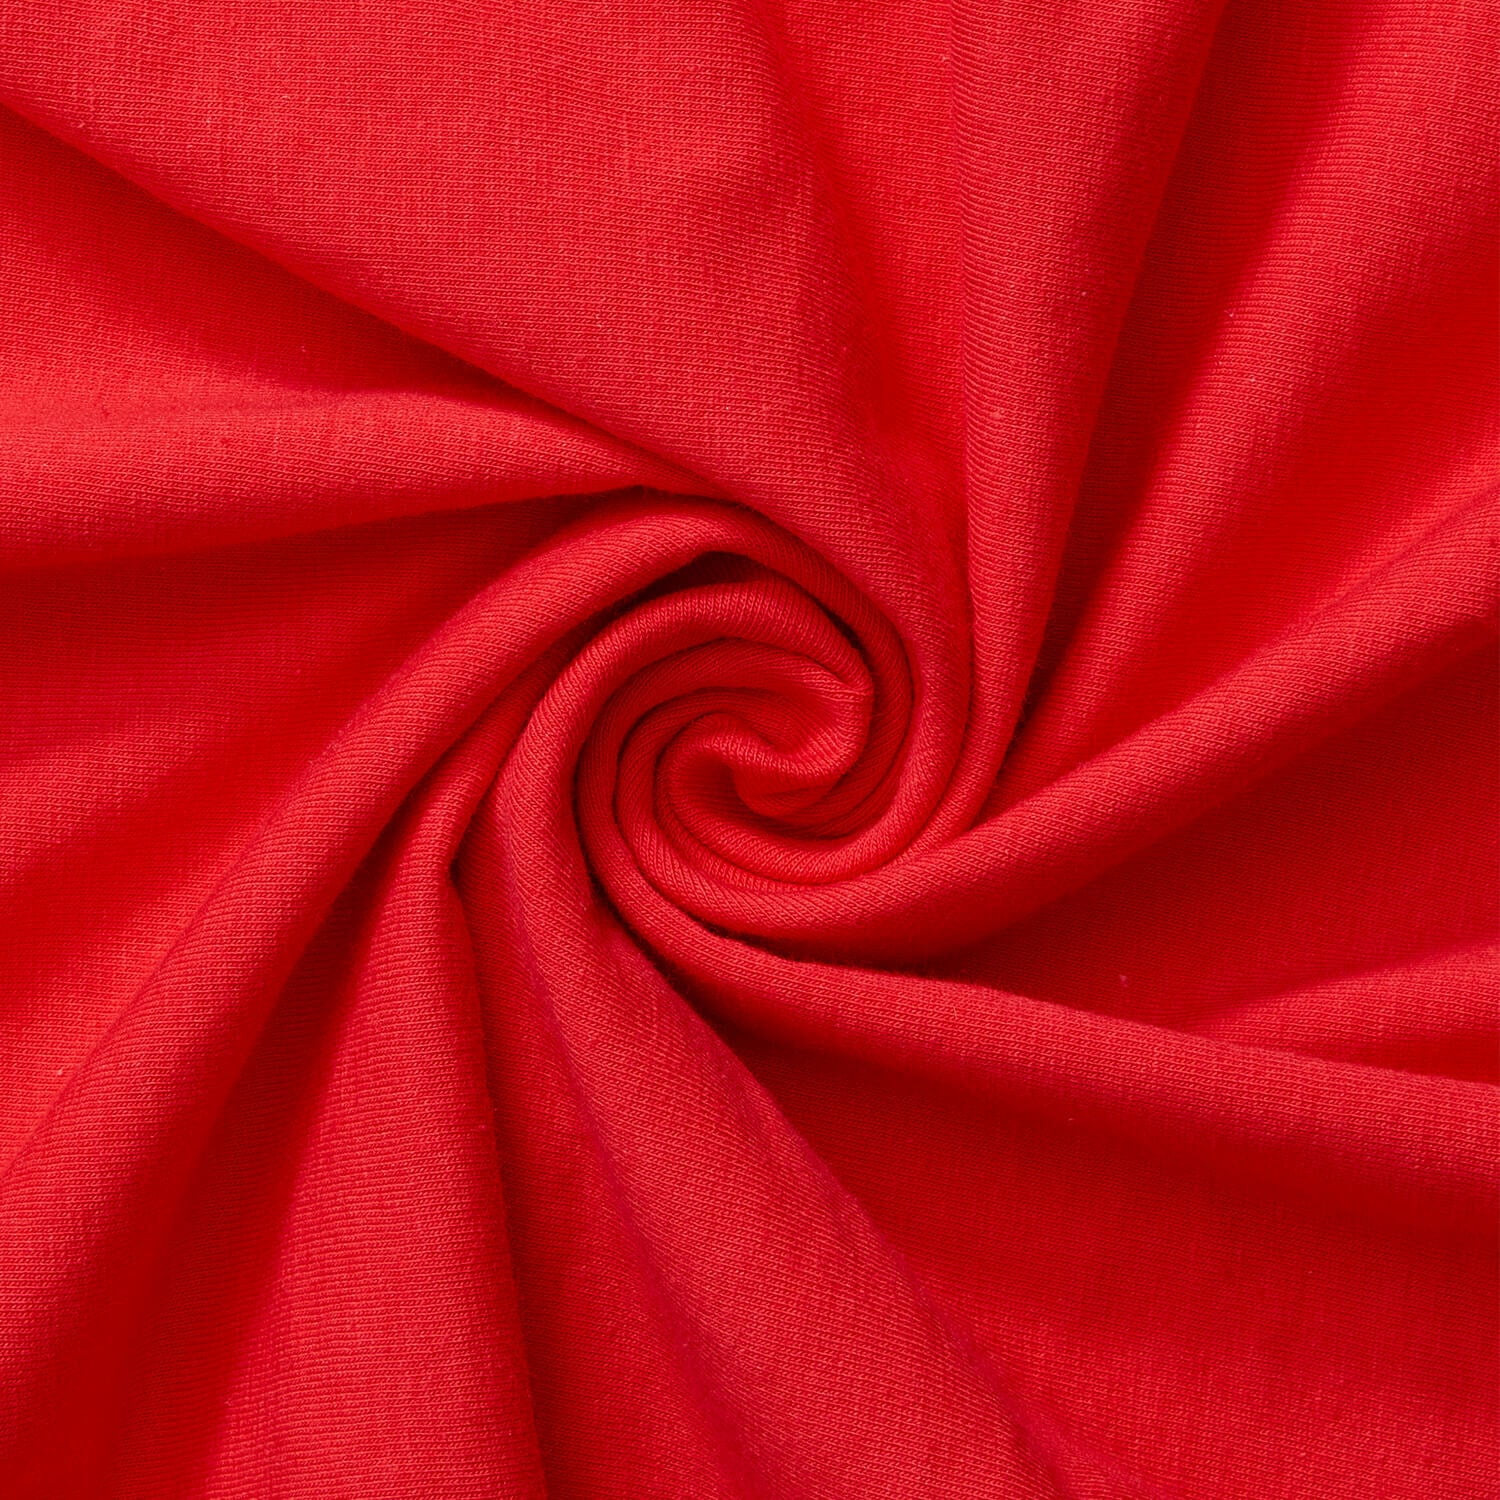  Nylon Lycra Spandex Athletic Stretch Knit Solid Red, Fabric by  the Yard : Arts, Crafts & Sewing